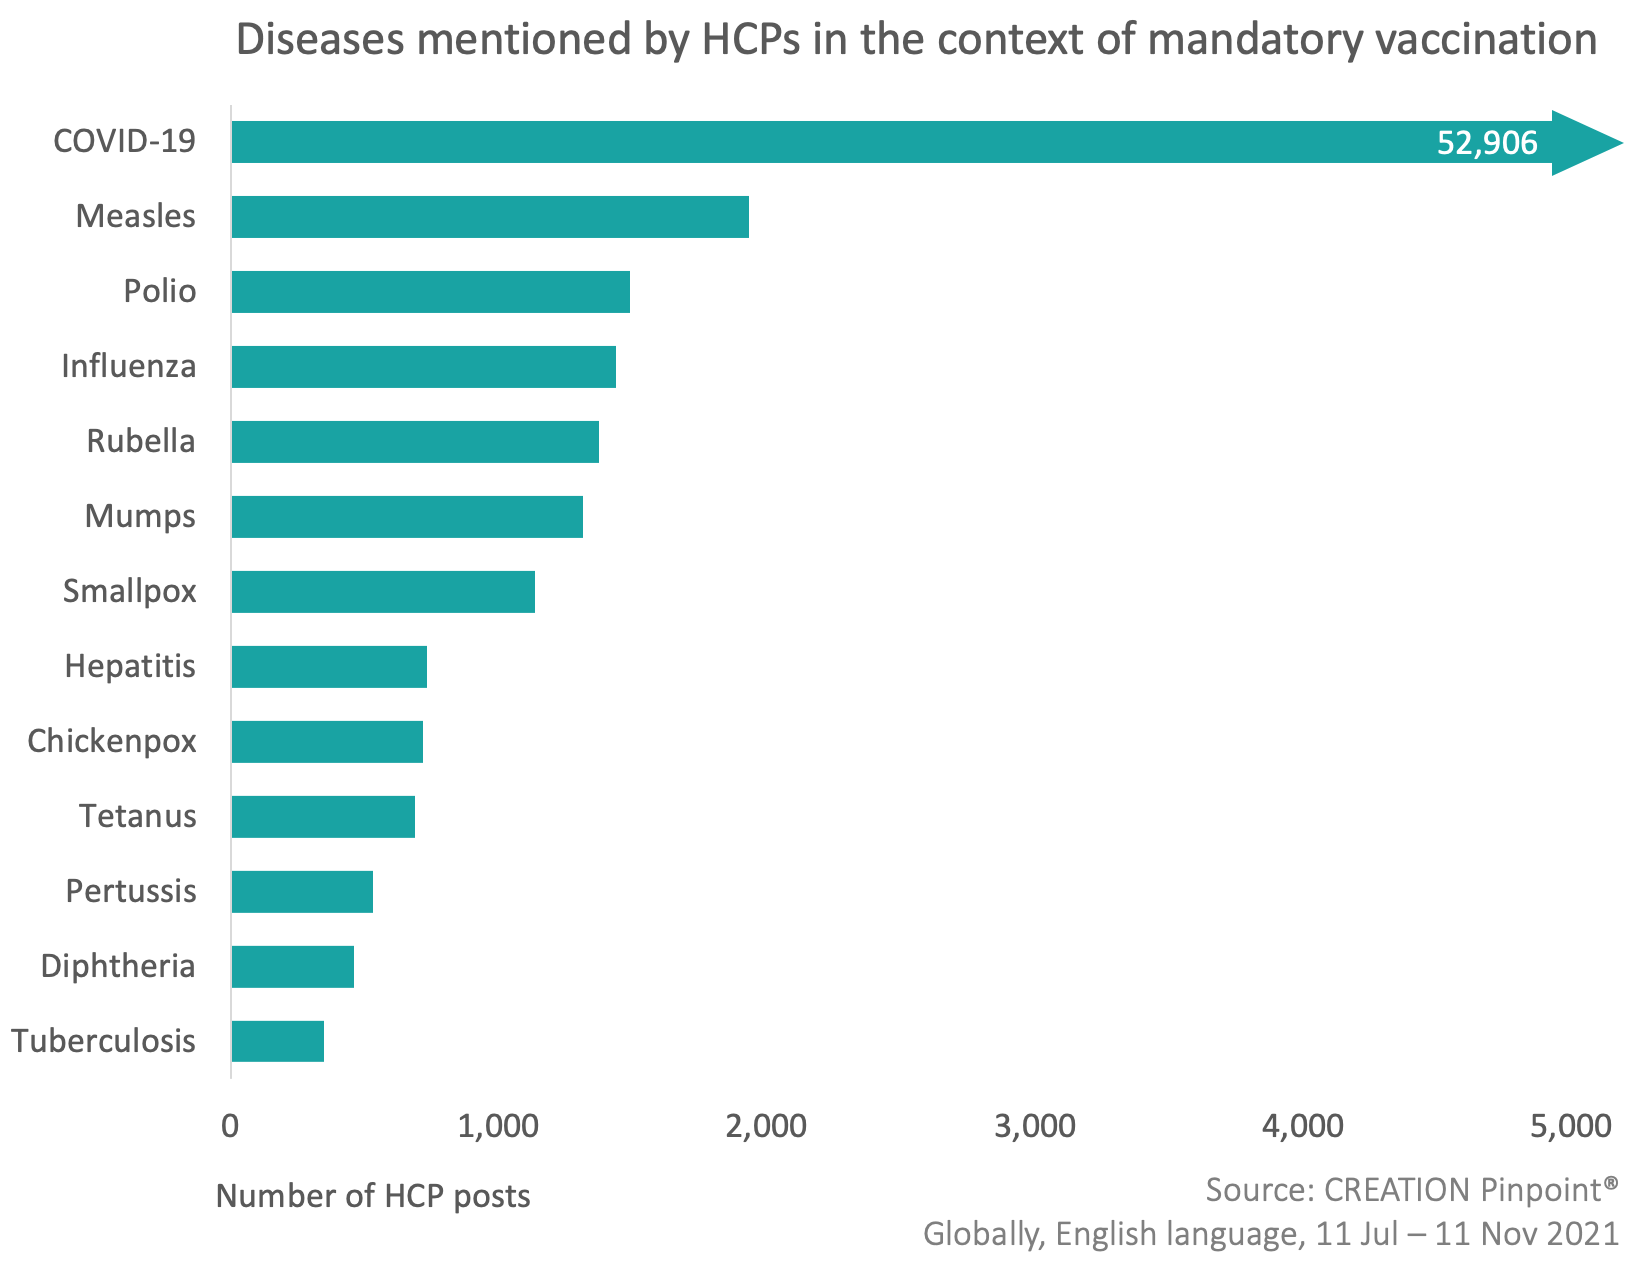 A graph showing diseases mentioned by HCPs in the context of mandatory vaccination